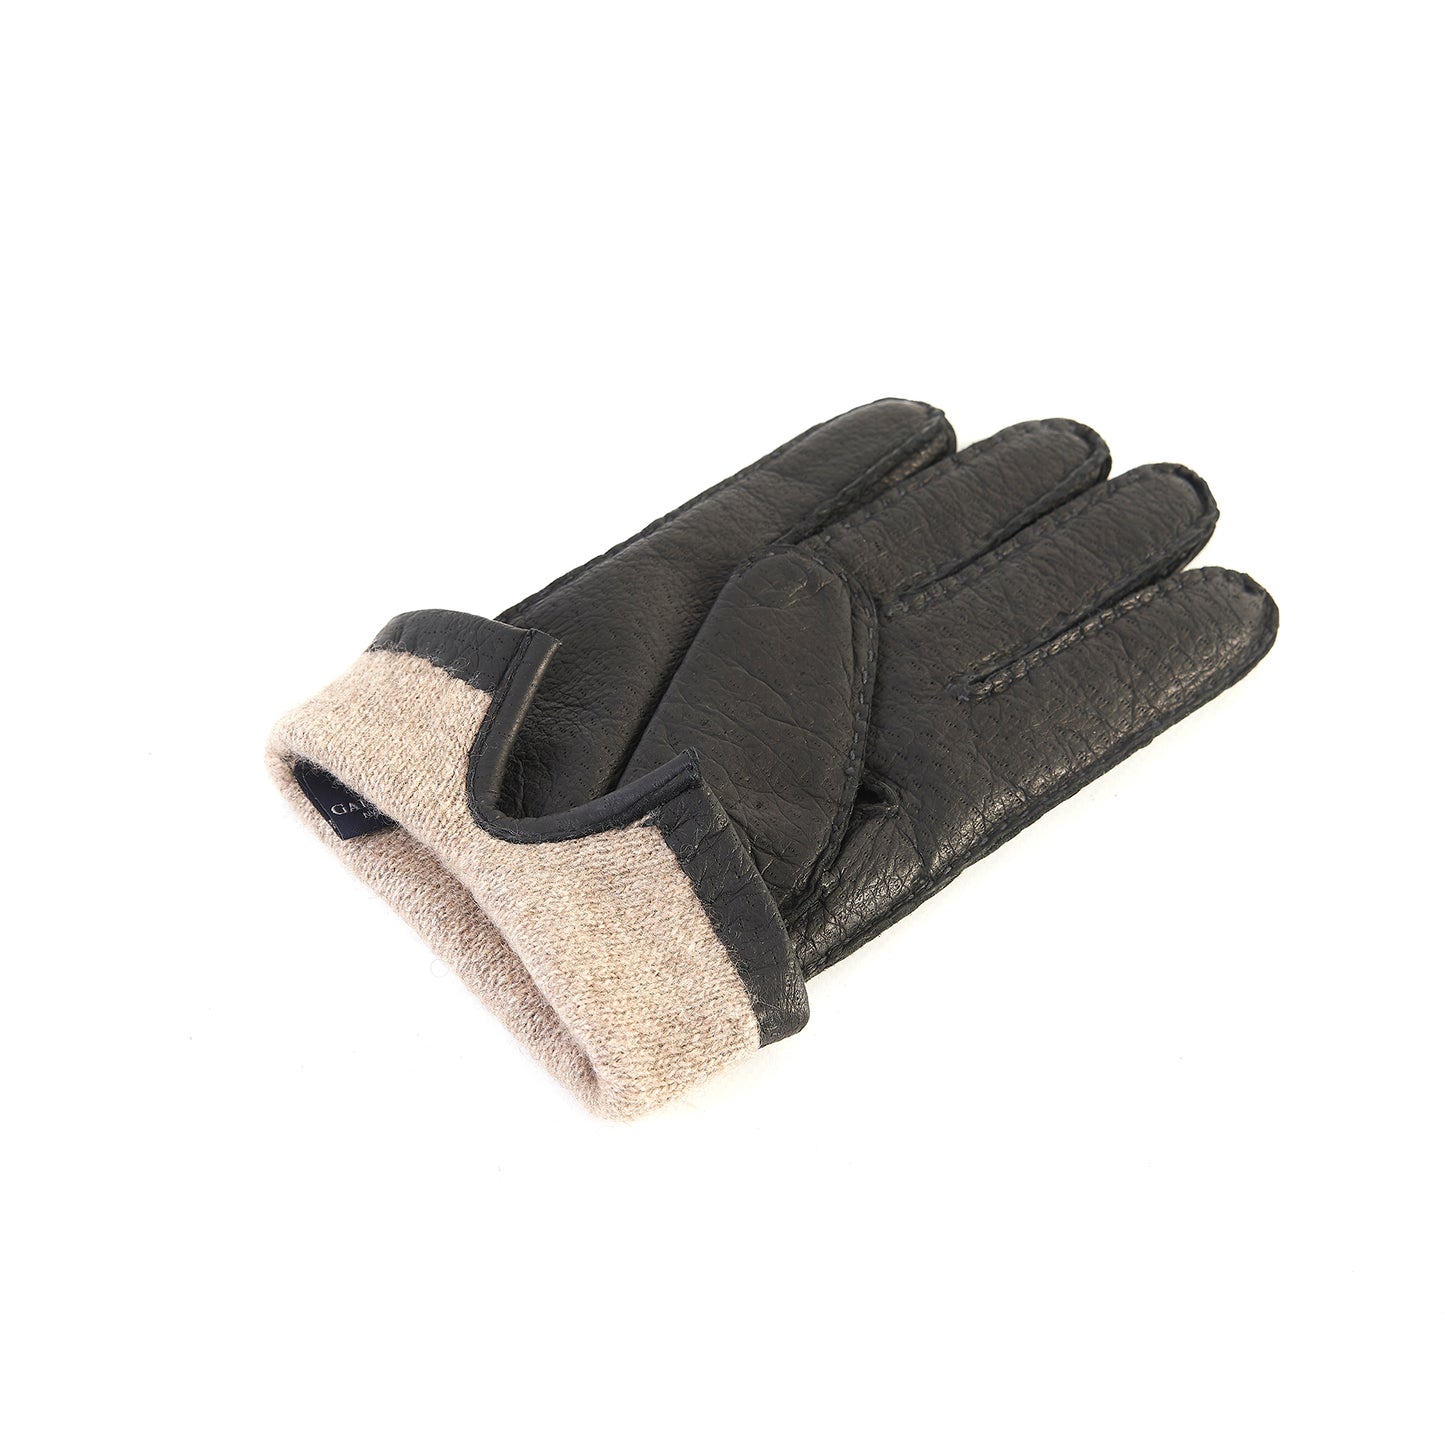 Men's black peccary leather gloves cashmere lined